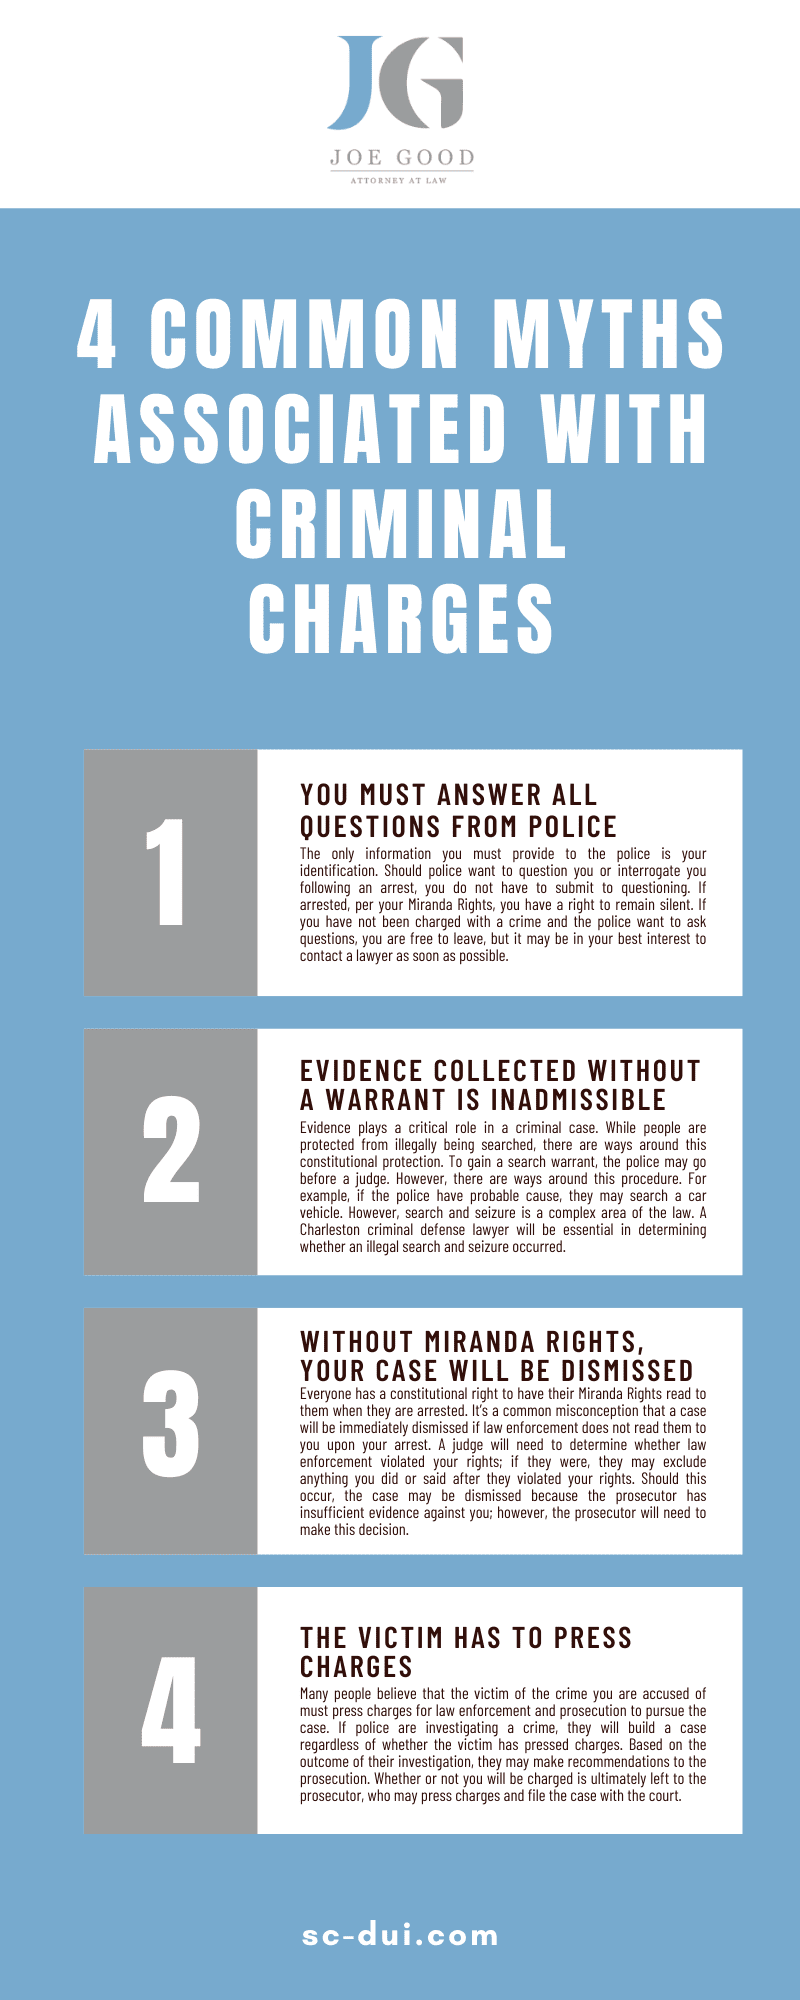 4 COMMON MYTHS ASSOCIATED WITH CRIMINAL CHARGES INFOGRAPHIC